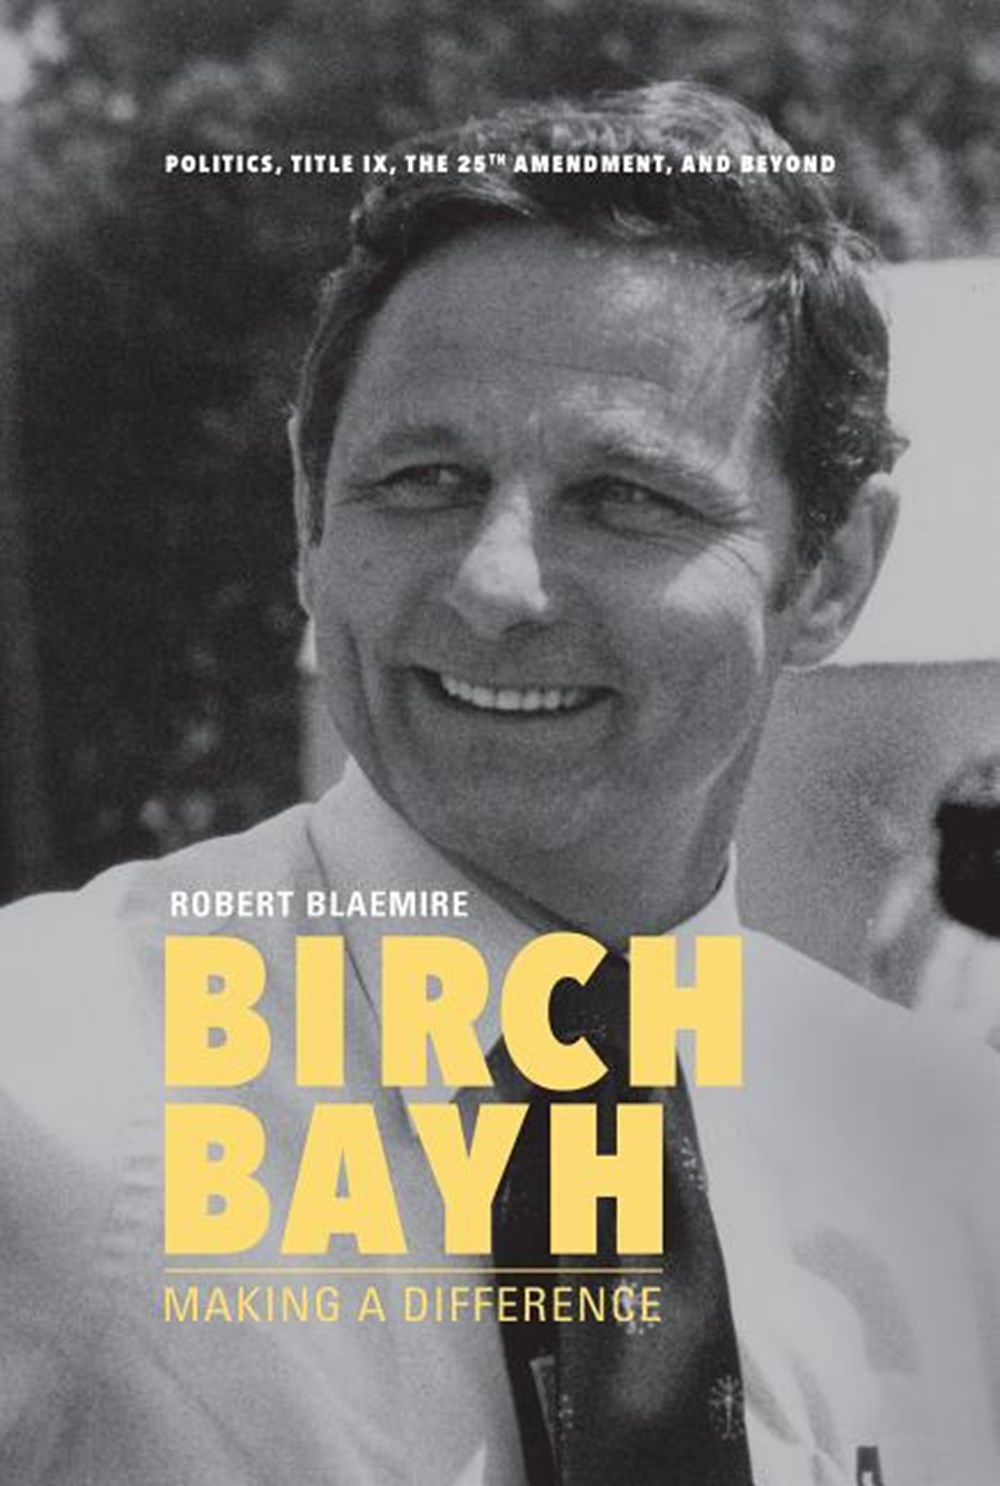 Birch Bayh Making a Difference